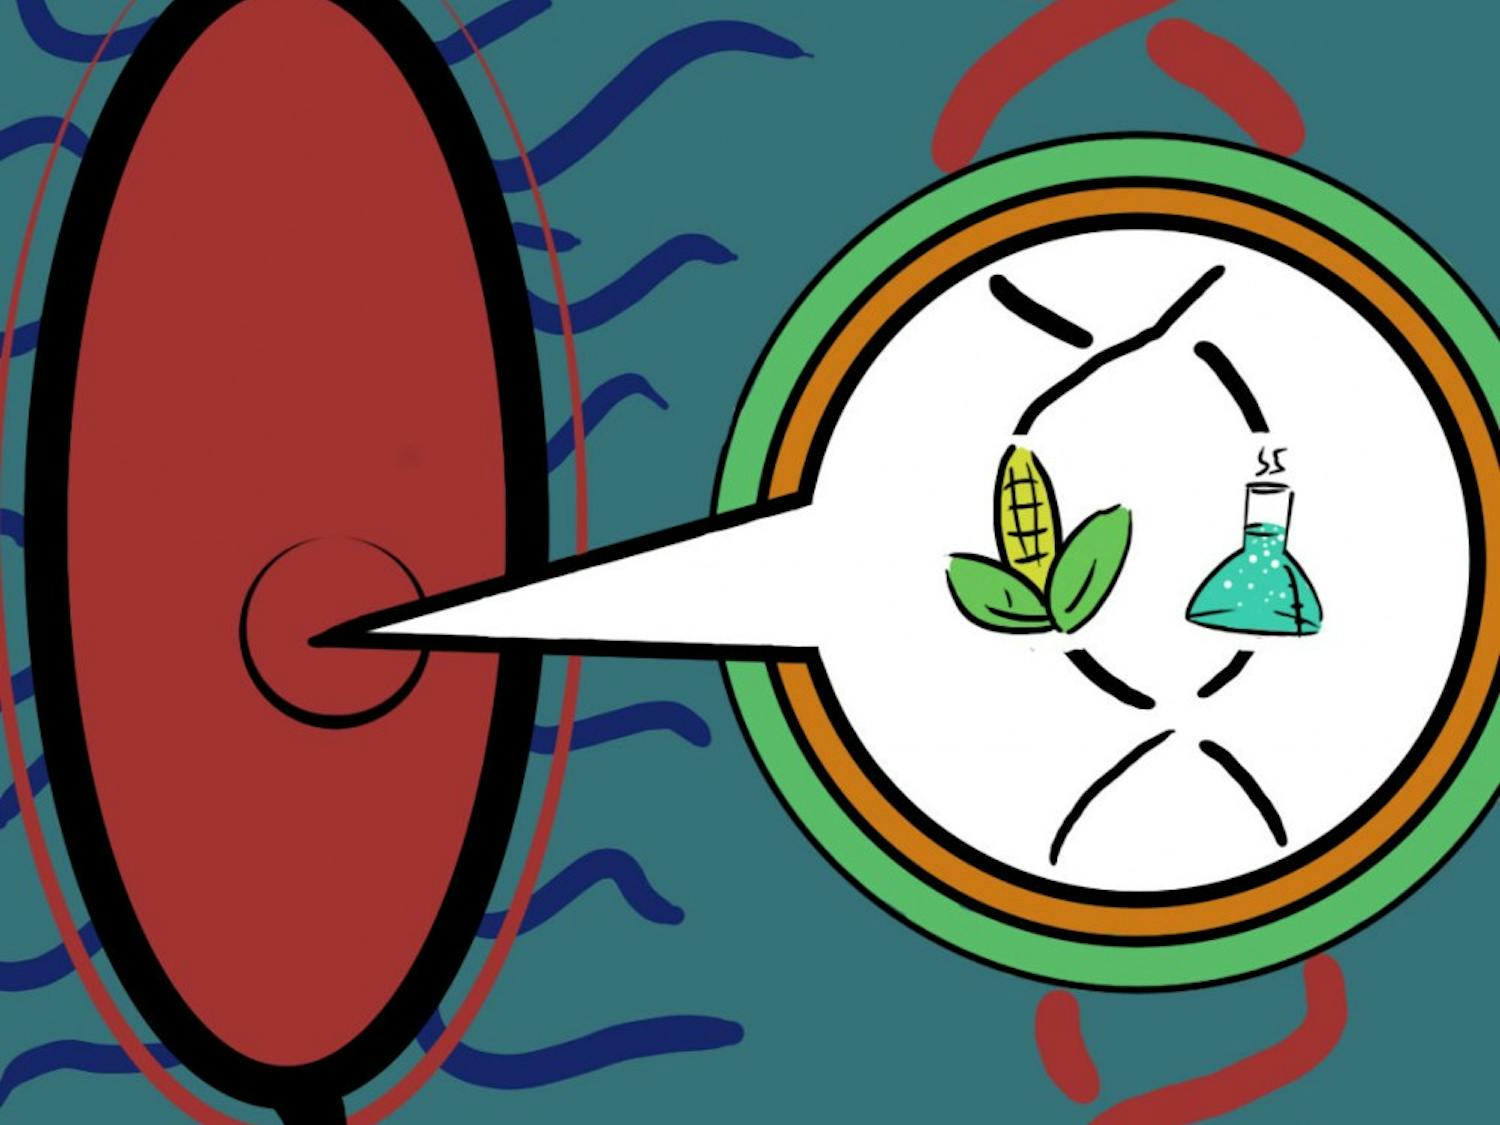 Bacterial genome reveals possible new fuels and chemicals